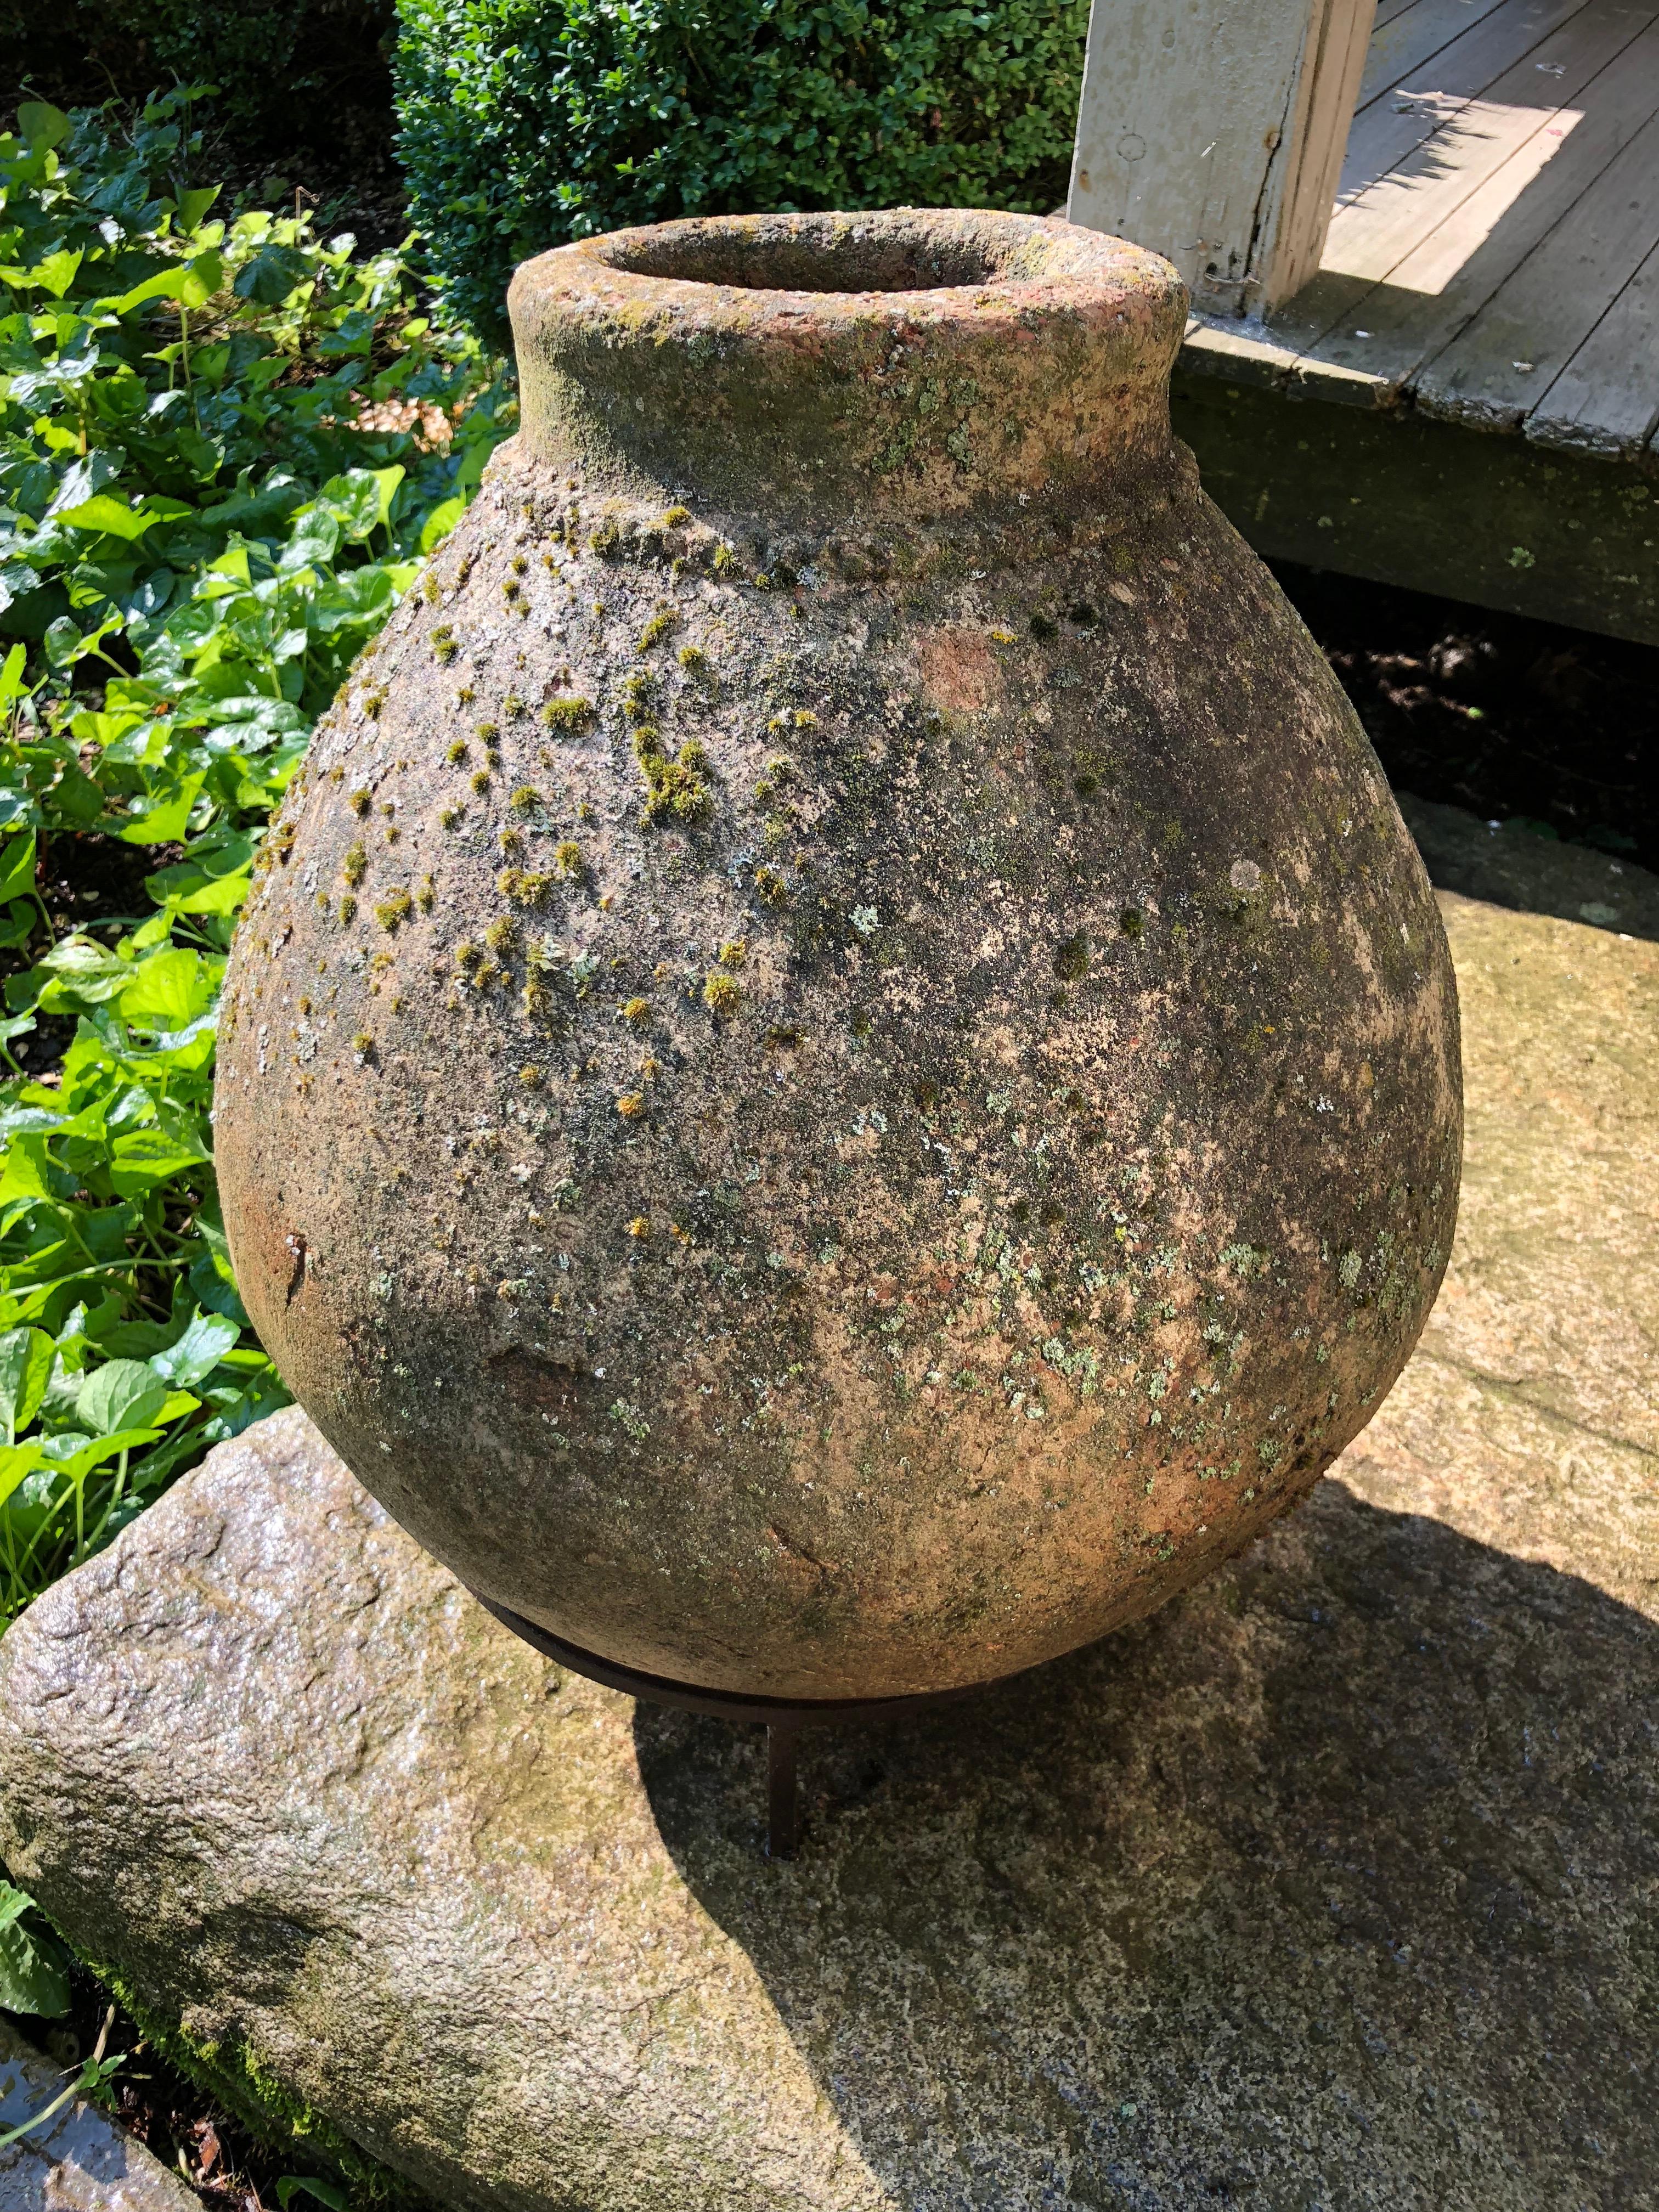 This lovely pot looks like terracotta, but is actually made of cast stone with a terracotta finish. It has a heavily-lichened surface with beautifully mossing that will continue to grow as long as the pot is placed in a damp and shady spot. It